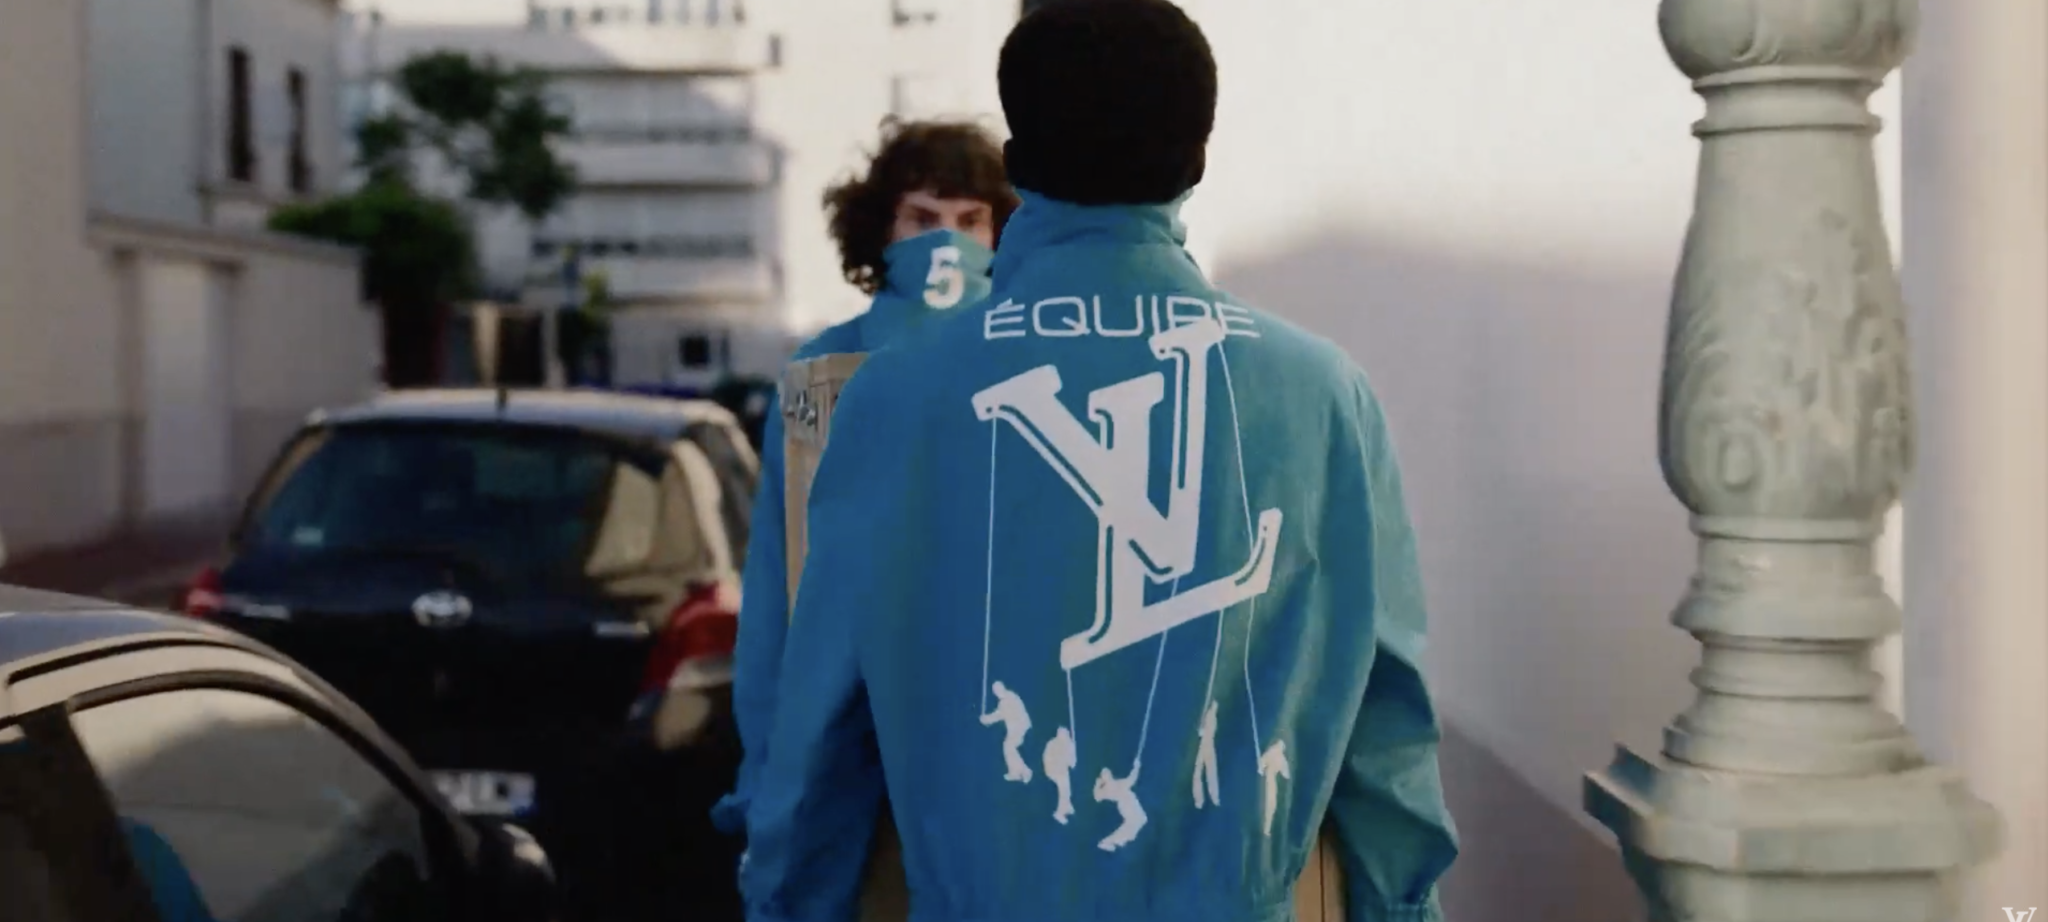 The Adventures of Zoooom with Friends by Virgil Abloh for Louis